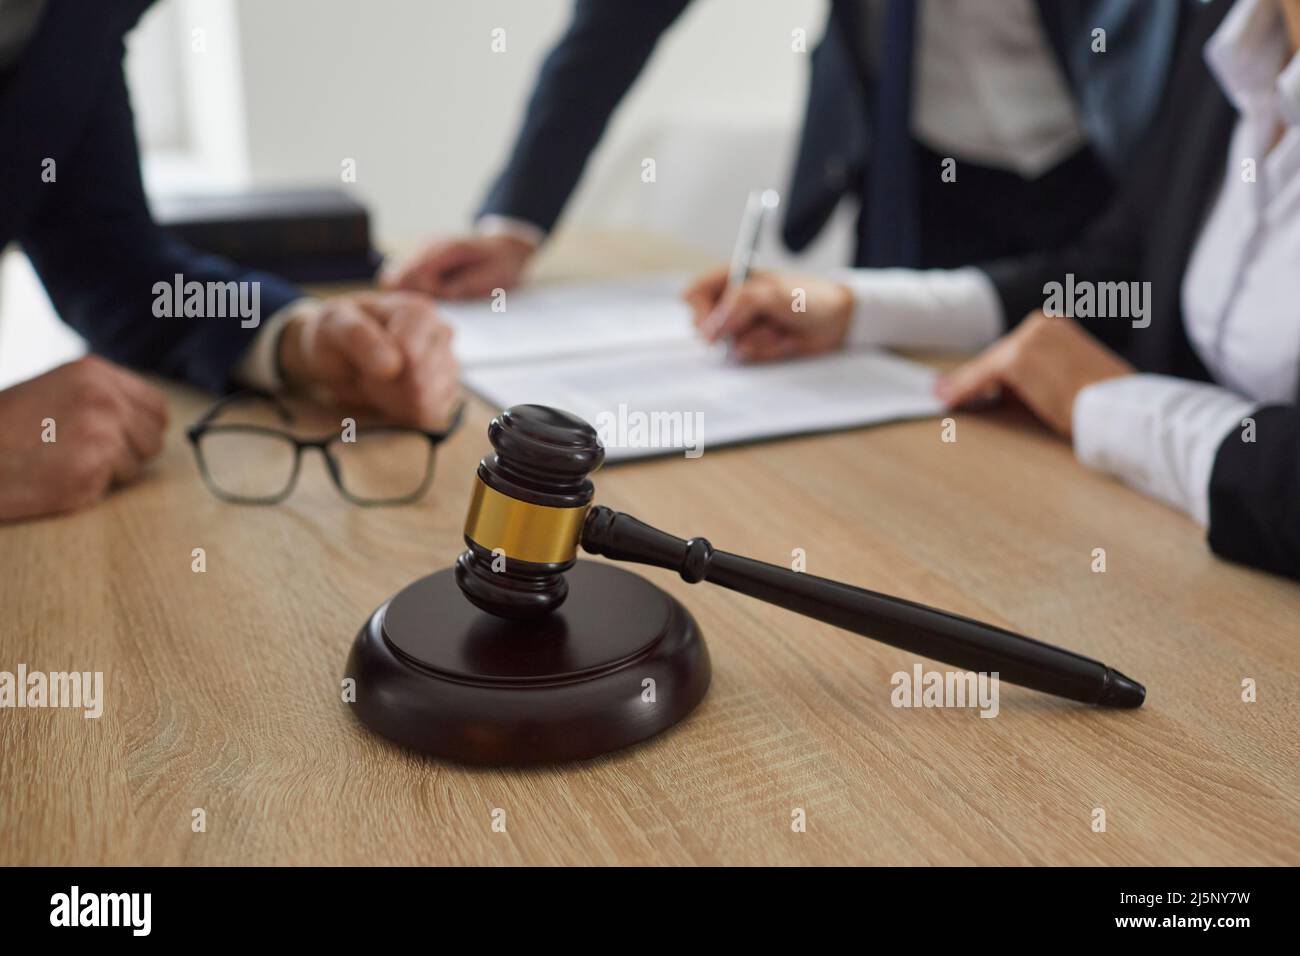 Judge's gavel on a wooden table, and a lawyer giving legal advice to clients in the background Stock Photo